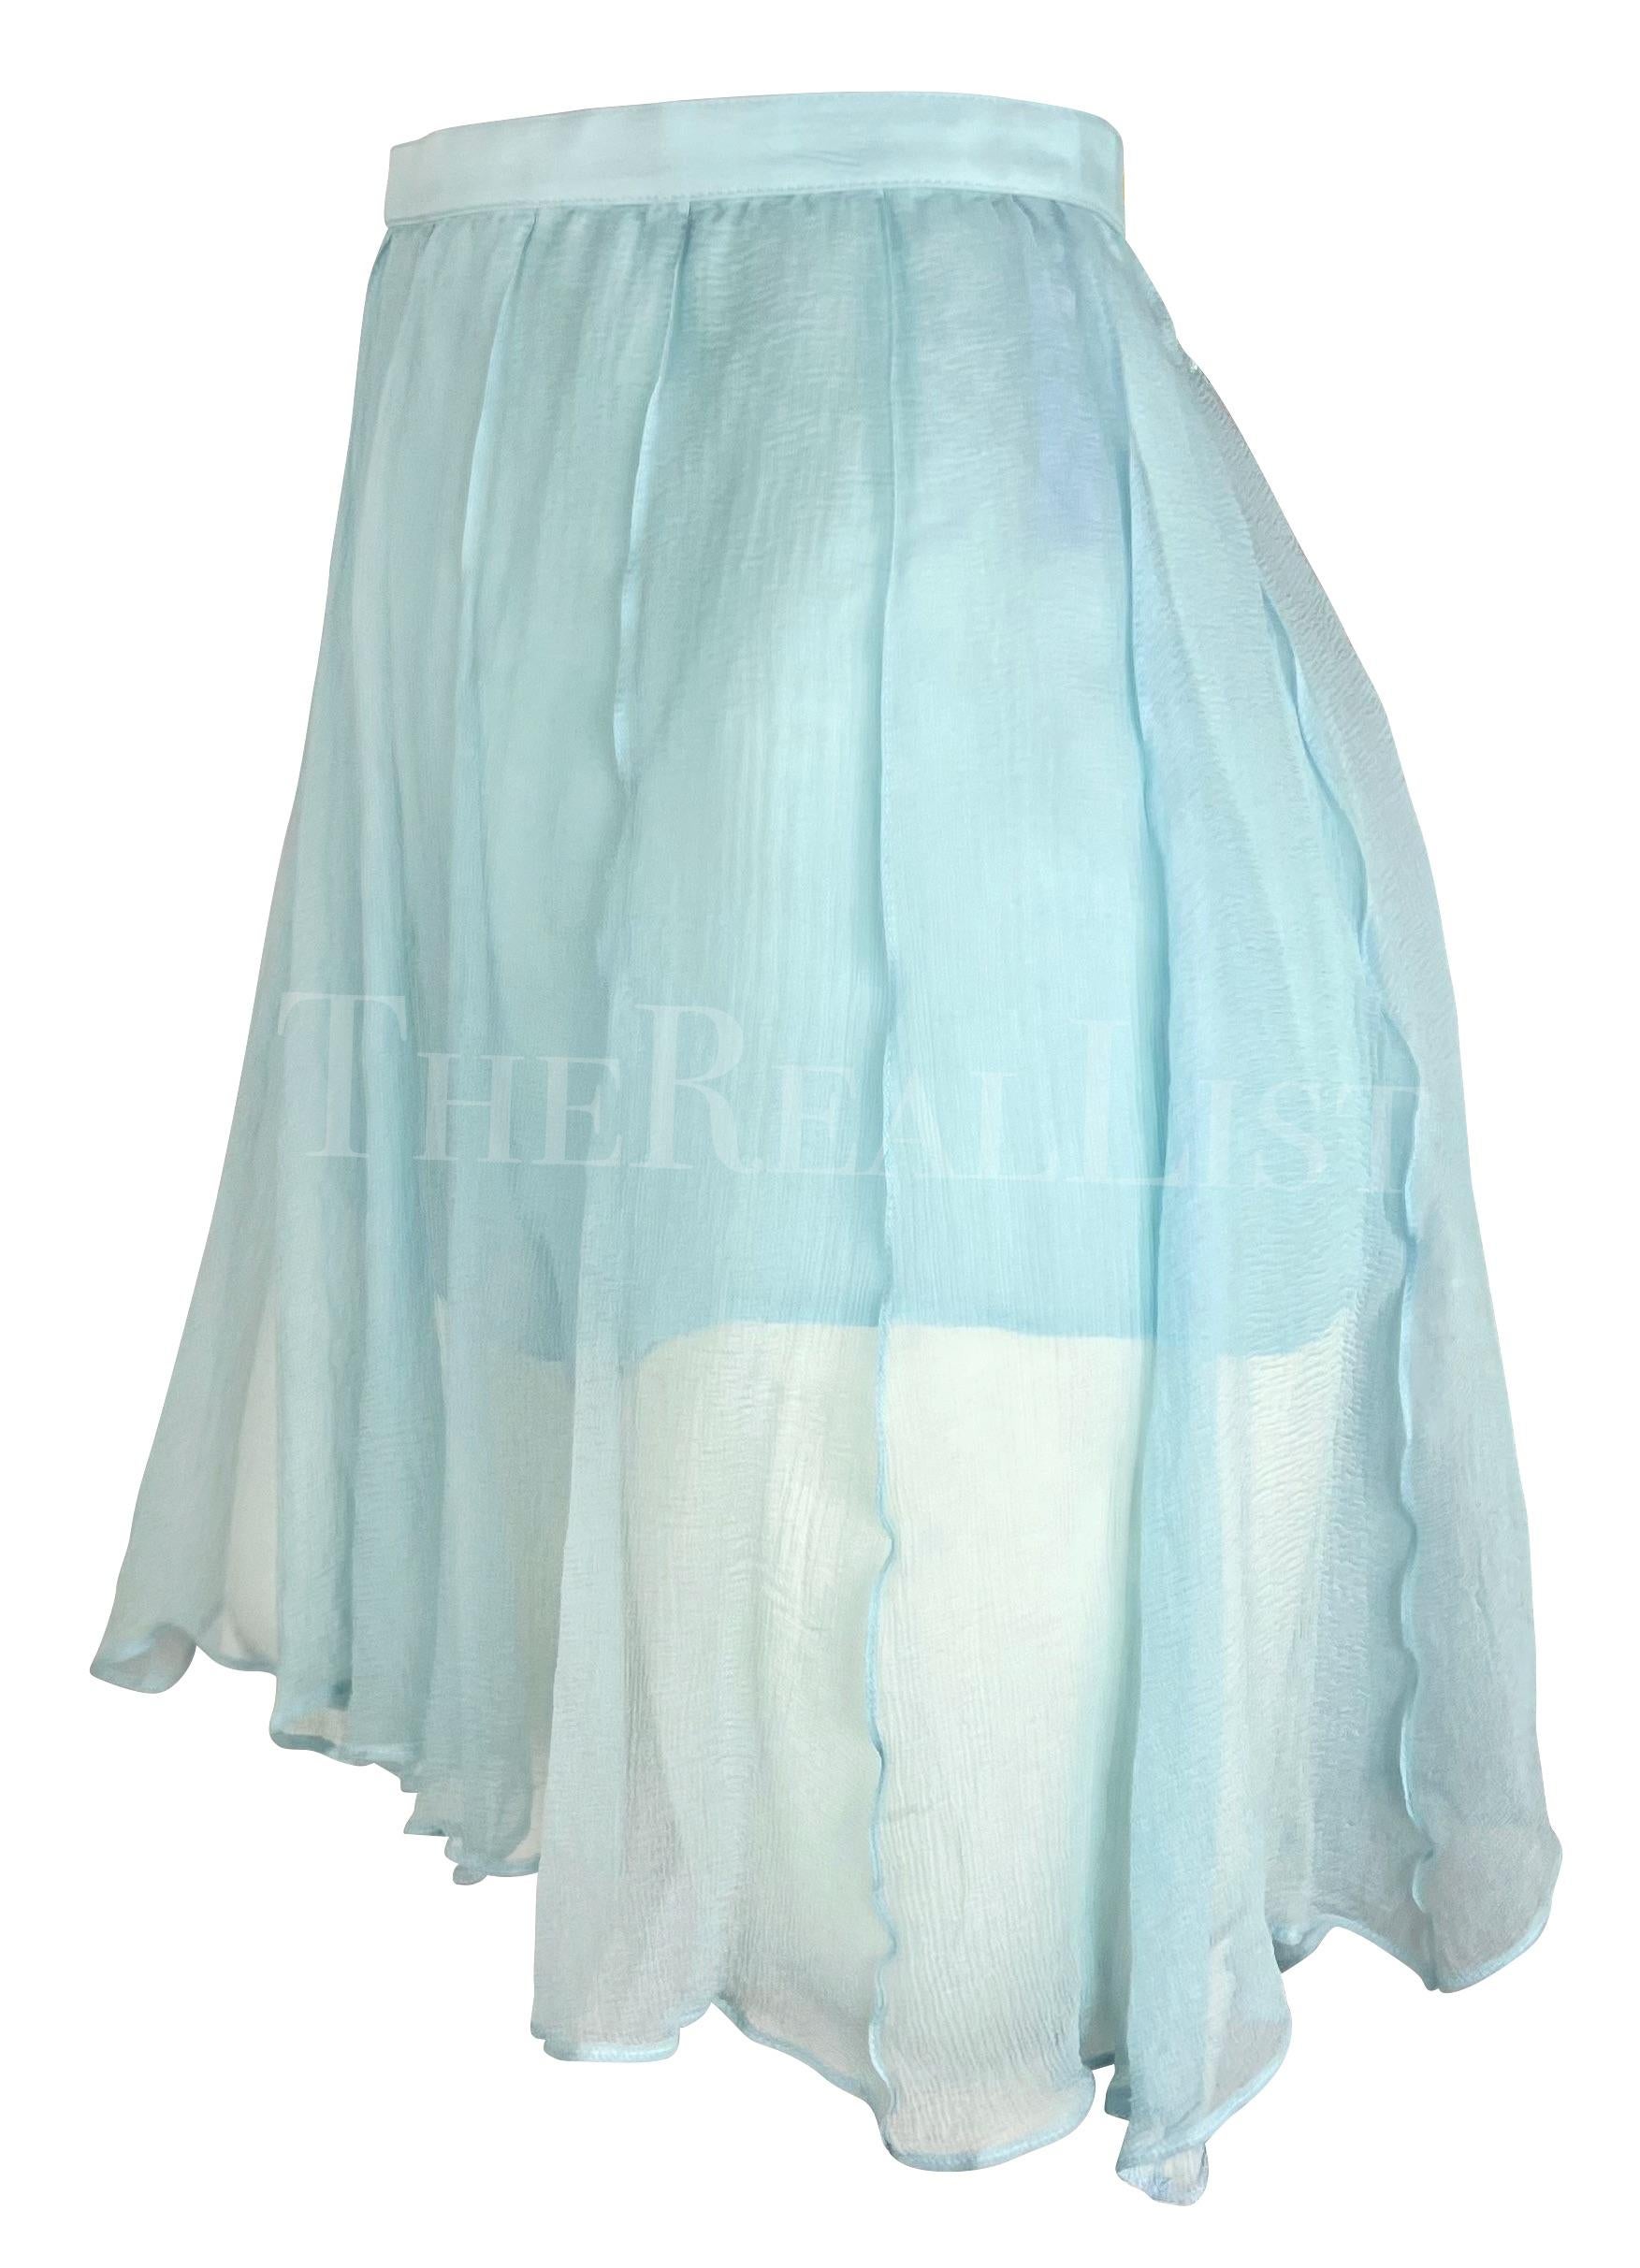 1990s Thierry Mugler Light Blue Sheer Pleated Silk Skirt Short Combo In Excellent Condition For Sale In West Hollywood, CA